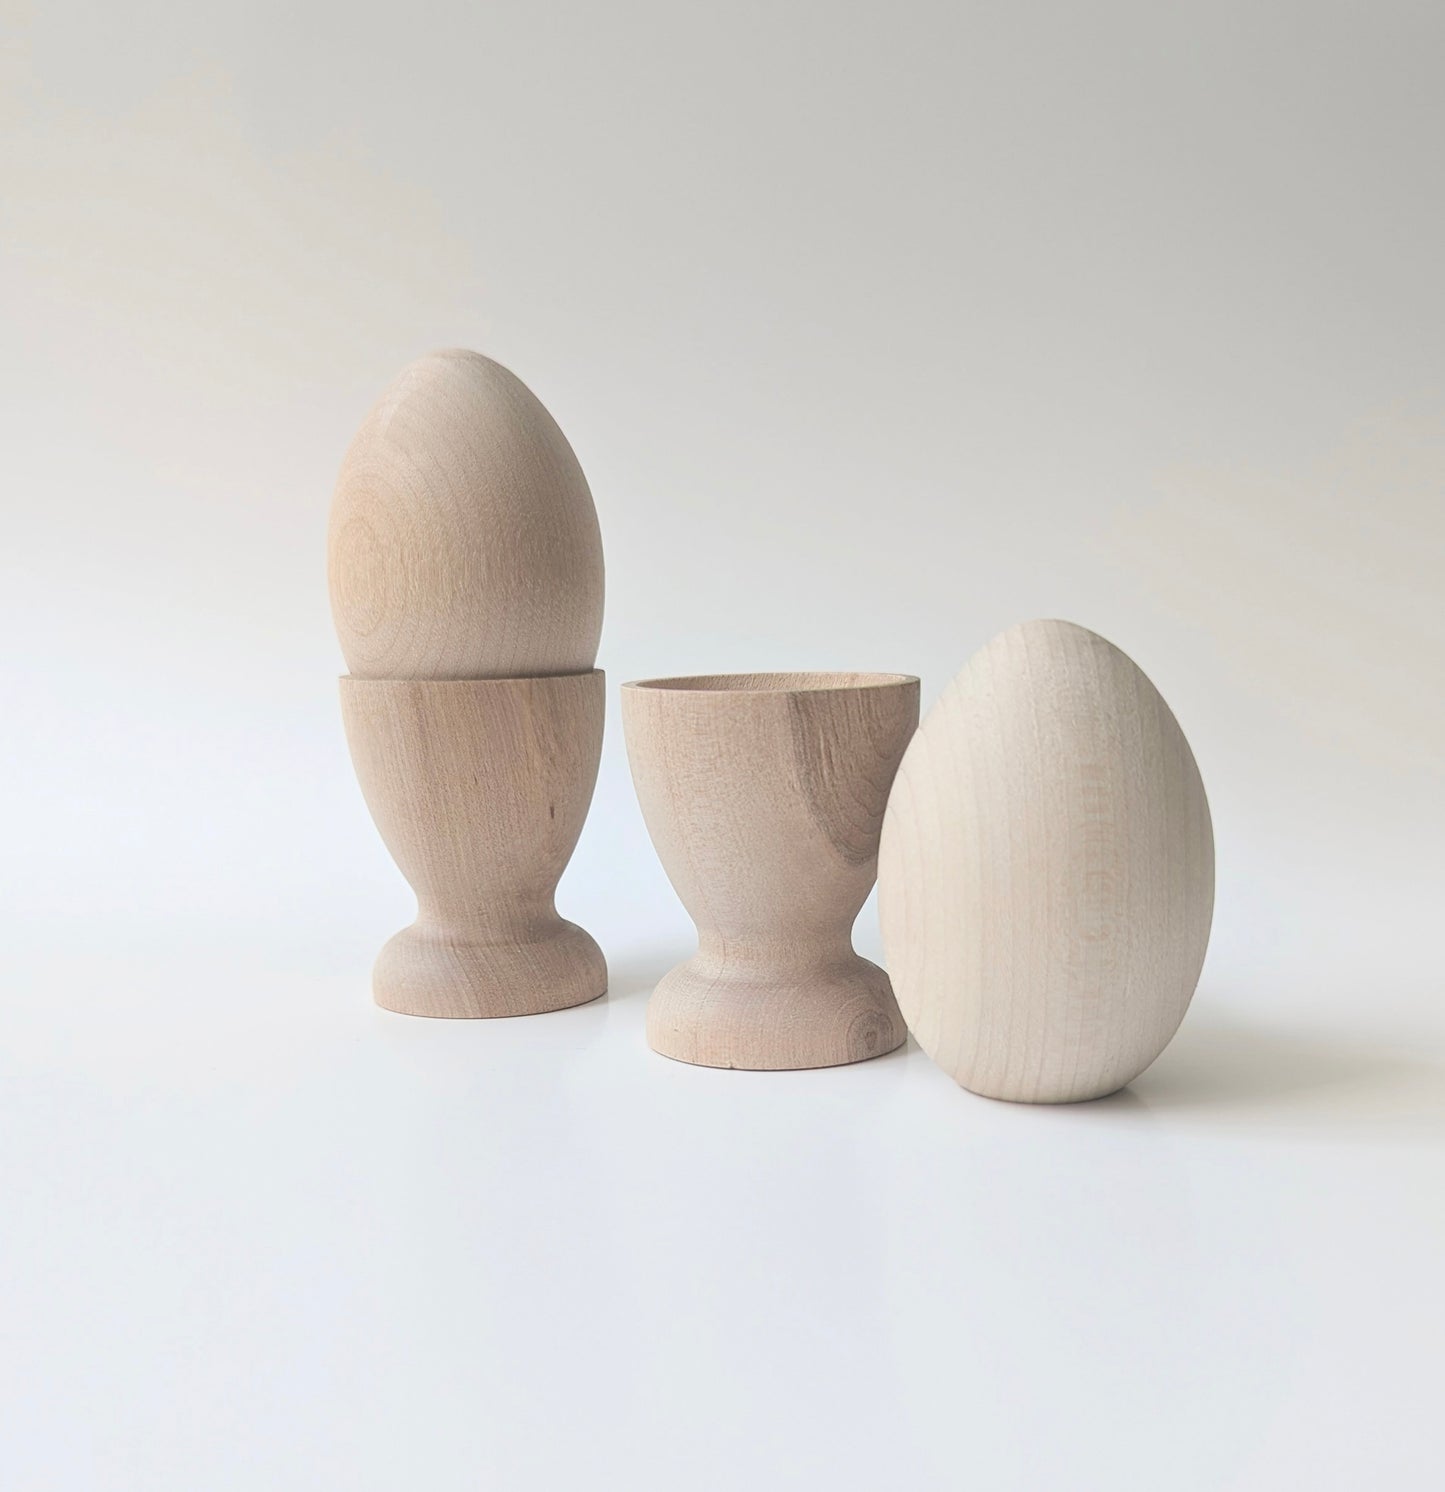 Wooden Egg in a Cup Toy